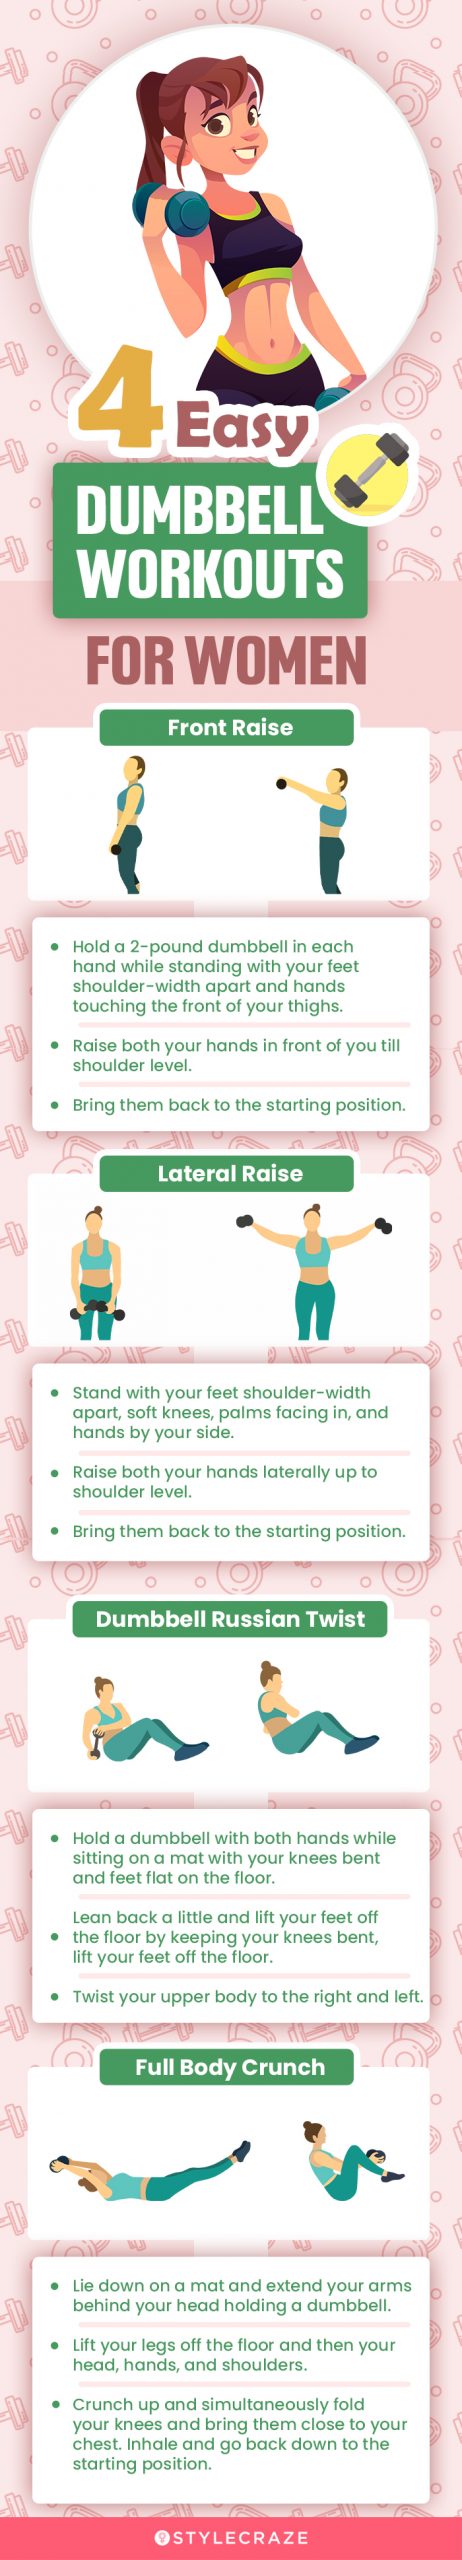 4 easy dumbbell workouts for women (infographic)